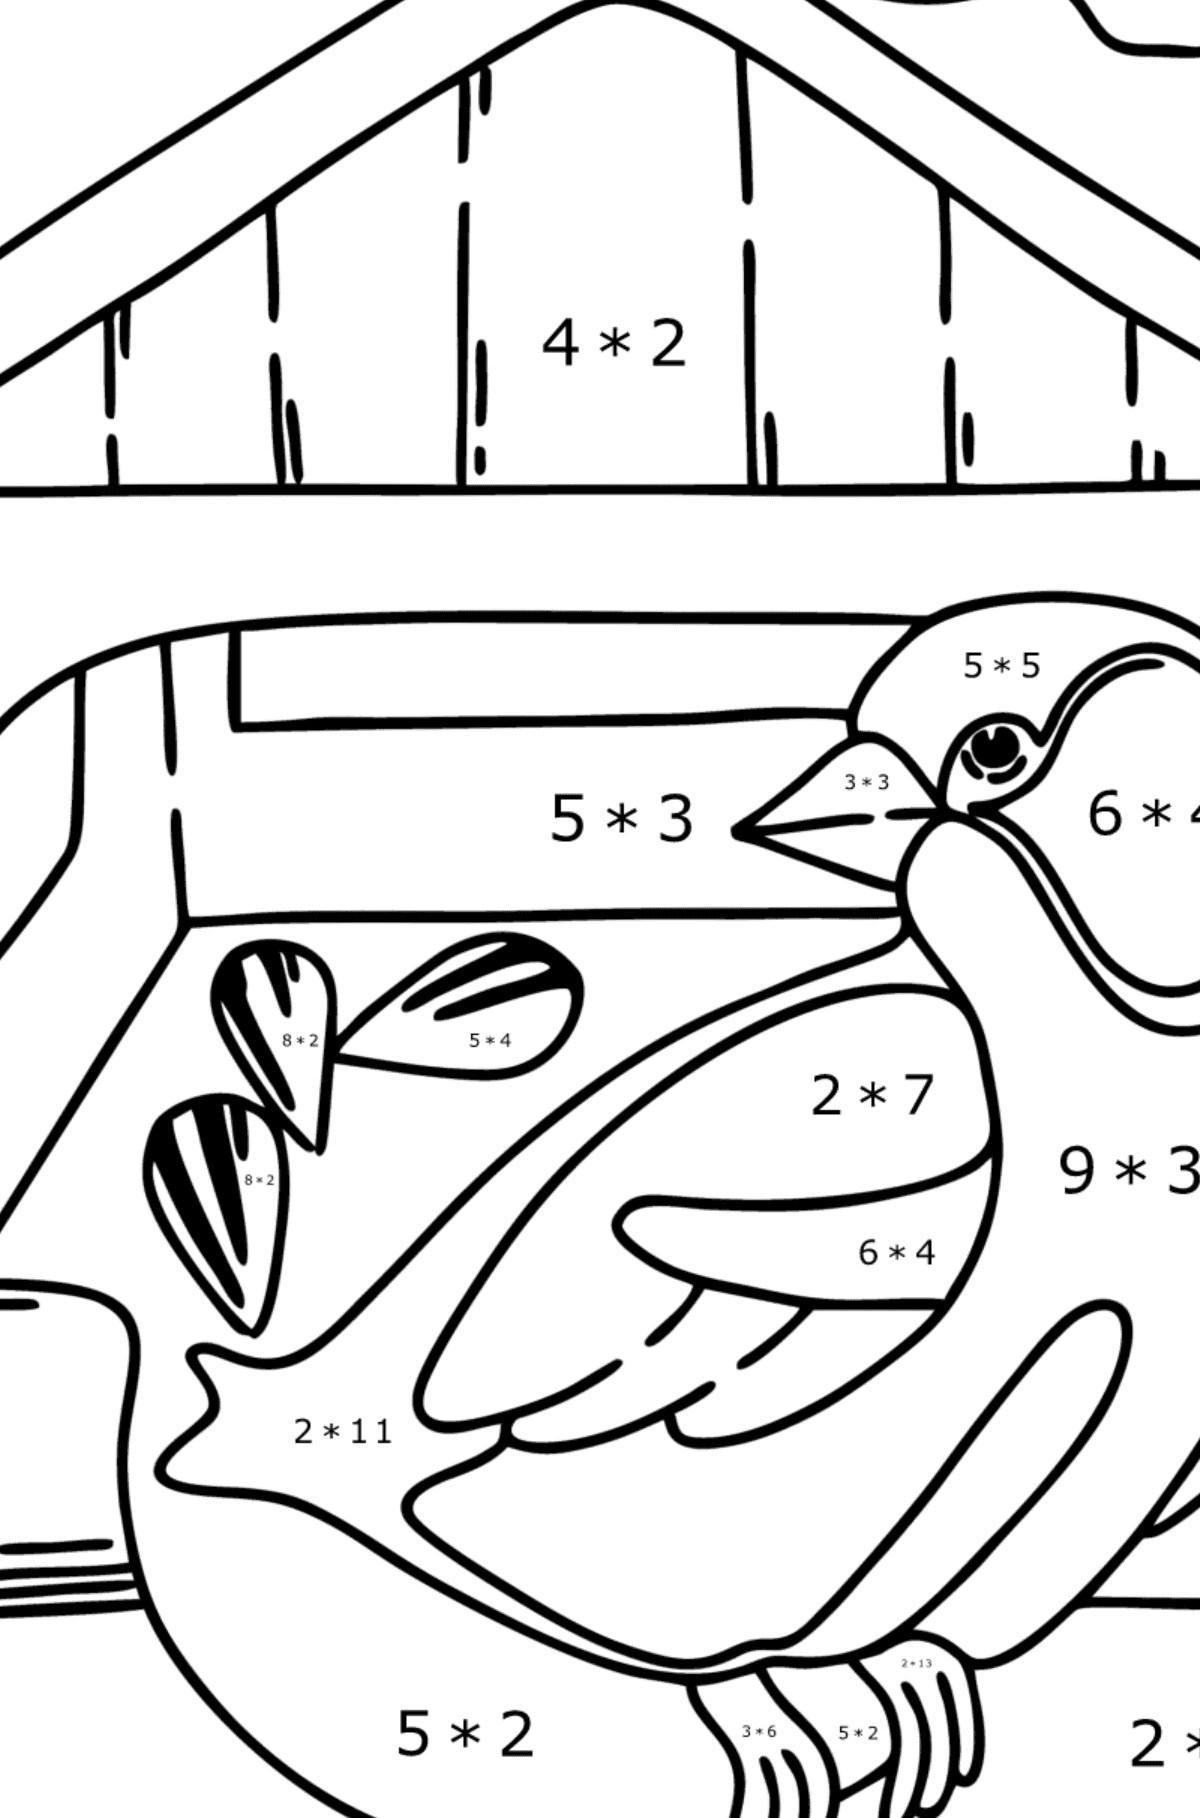 Coloring page - Bird feeder - Math Coloring - Multiplication for Kids